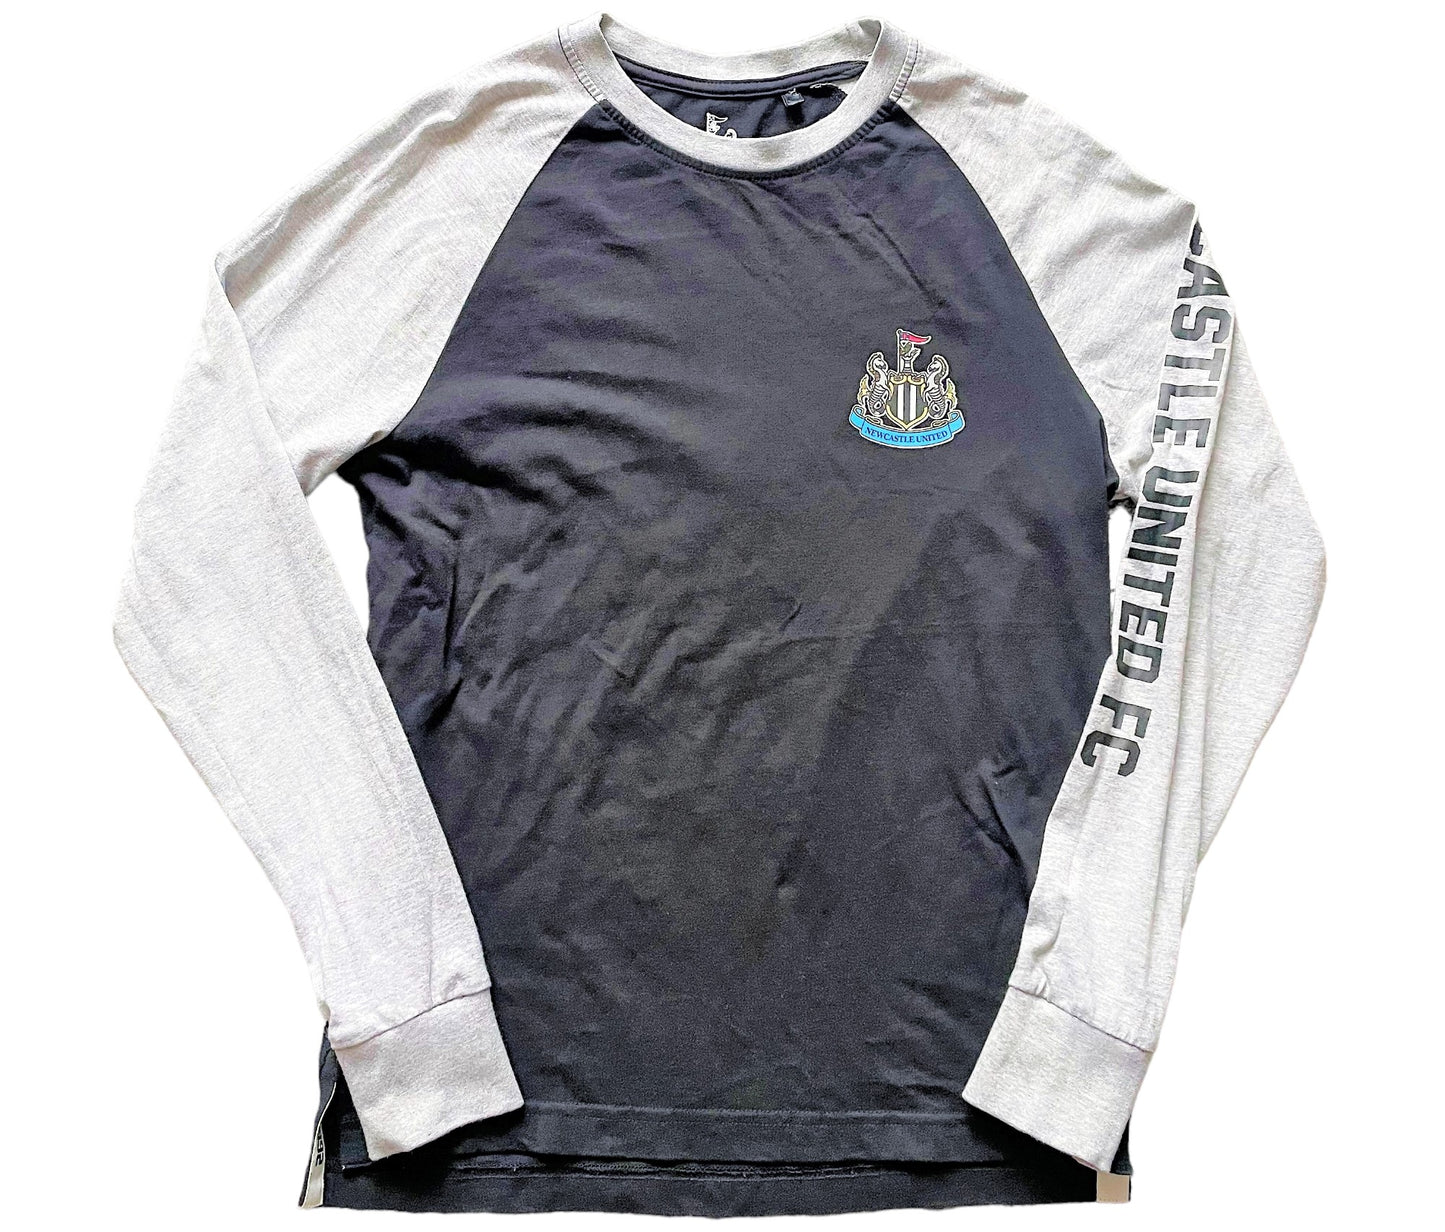 Newcastle United Top (excellent) Childs 11-12 years 146-152cm